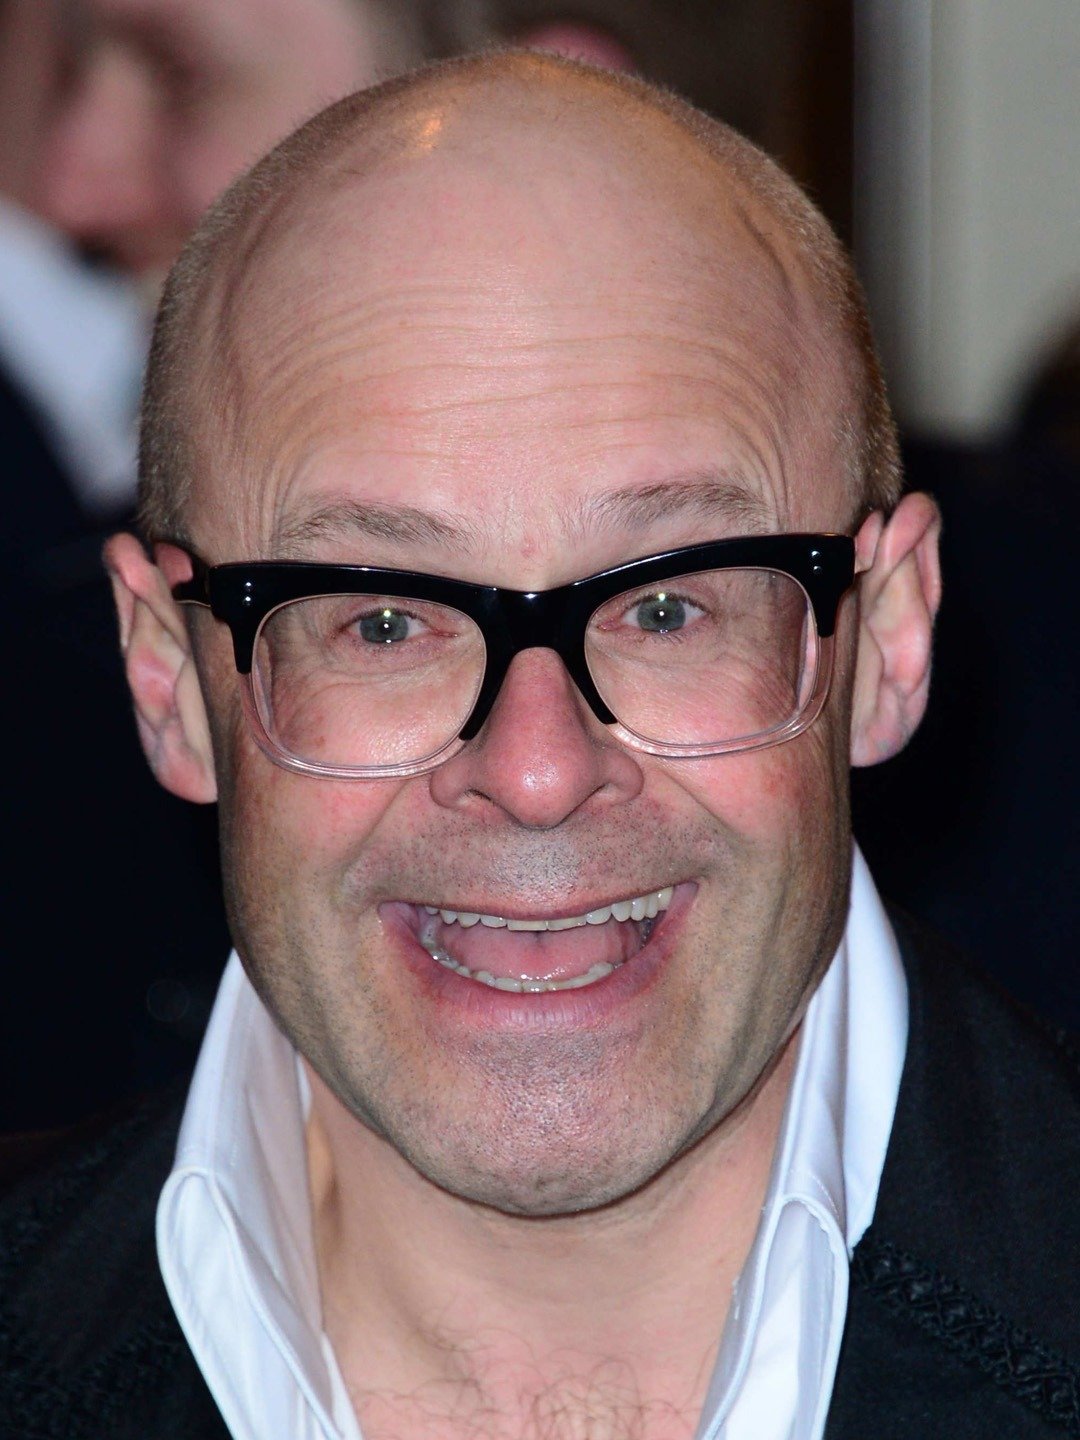 How tall is Harry Hill?